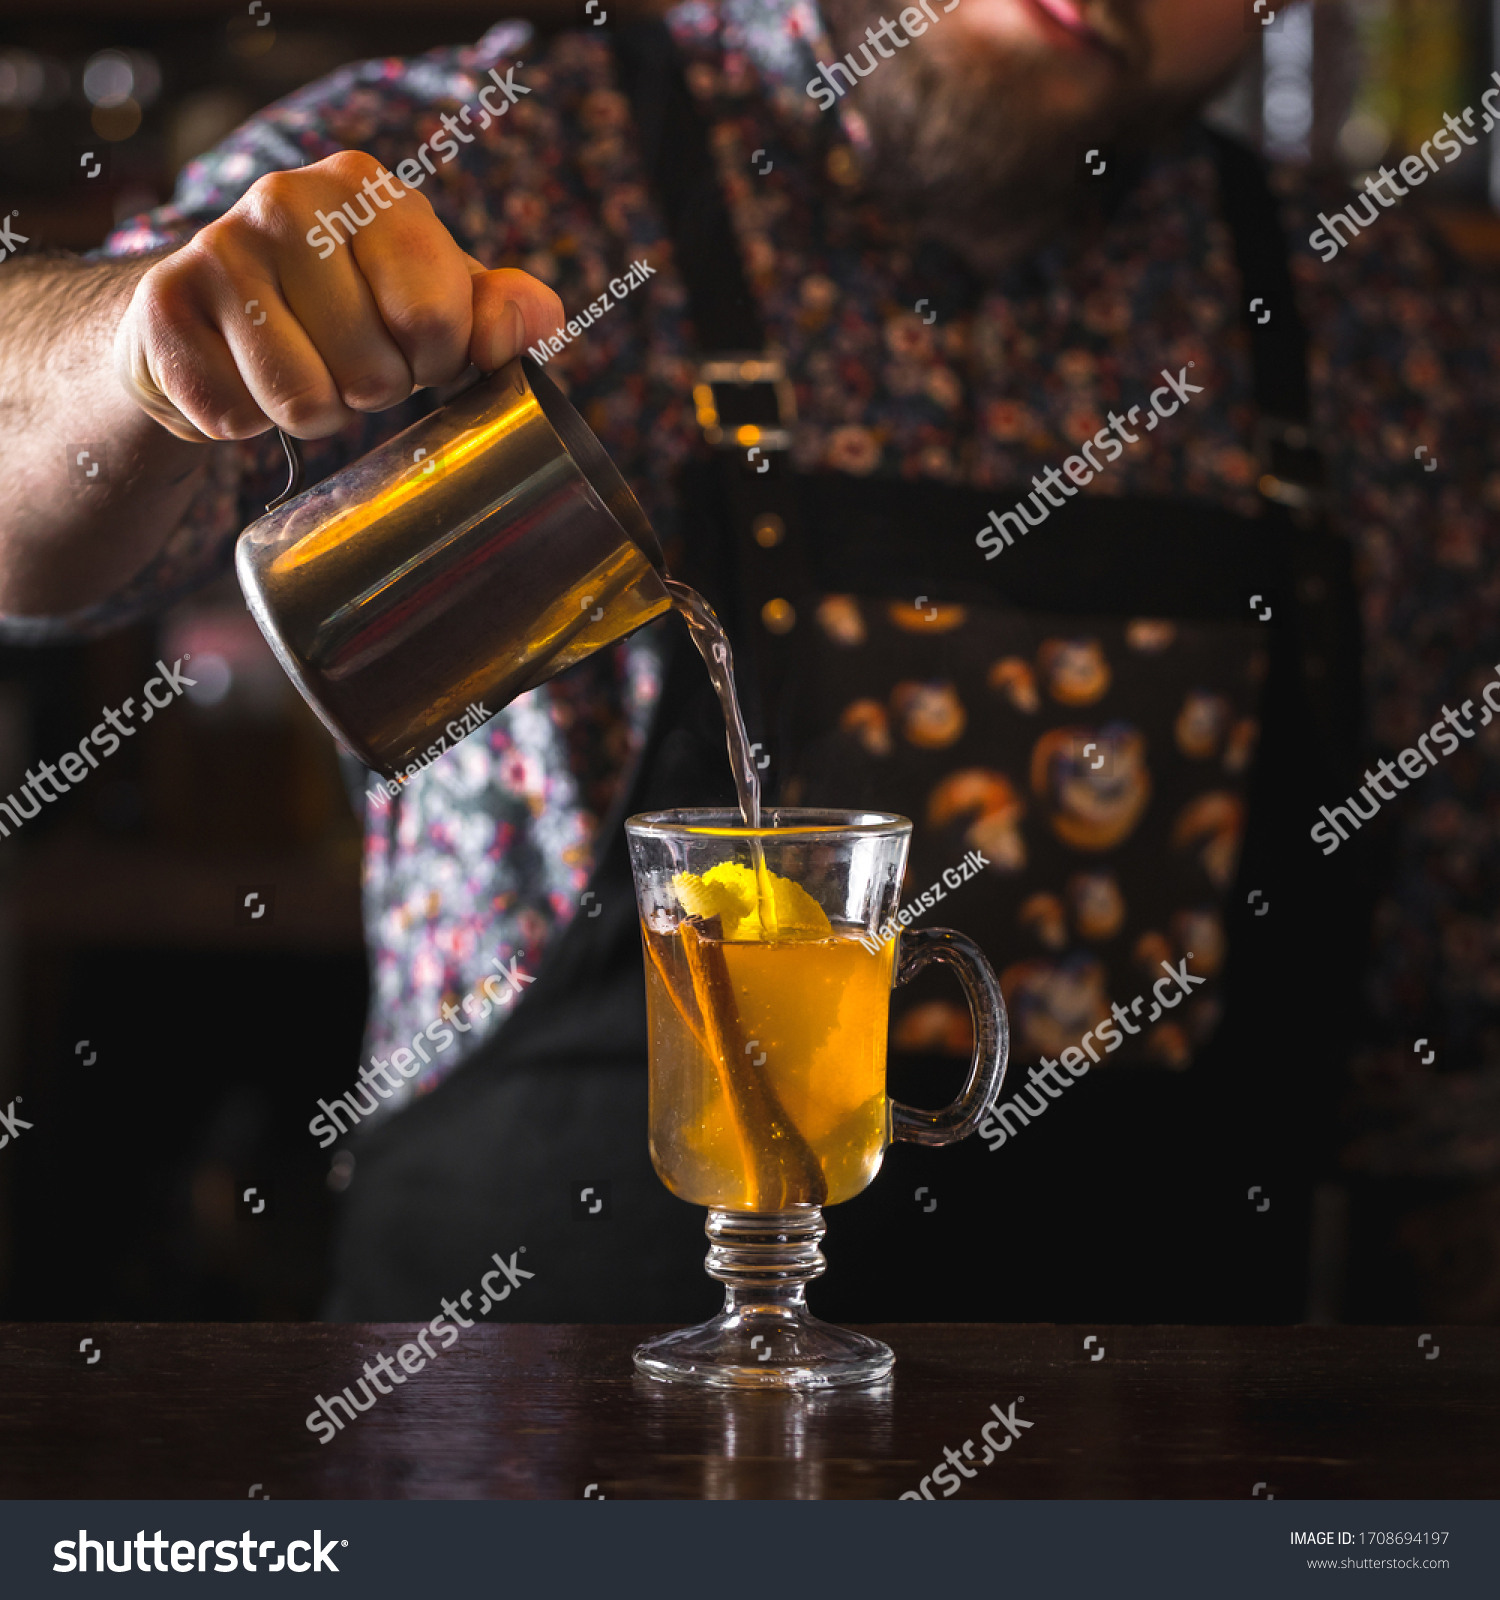 bartender preparing classic hot toddy cocktail #1708694197